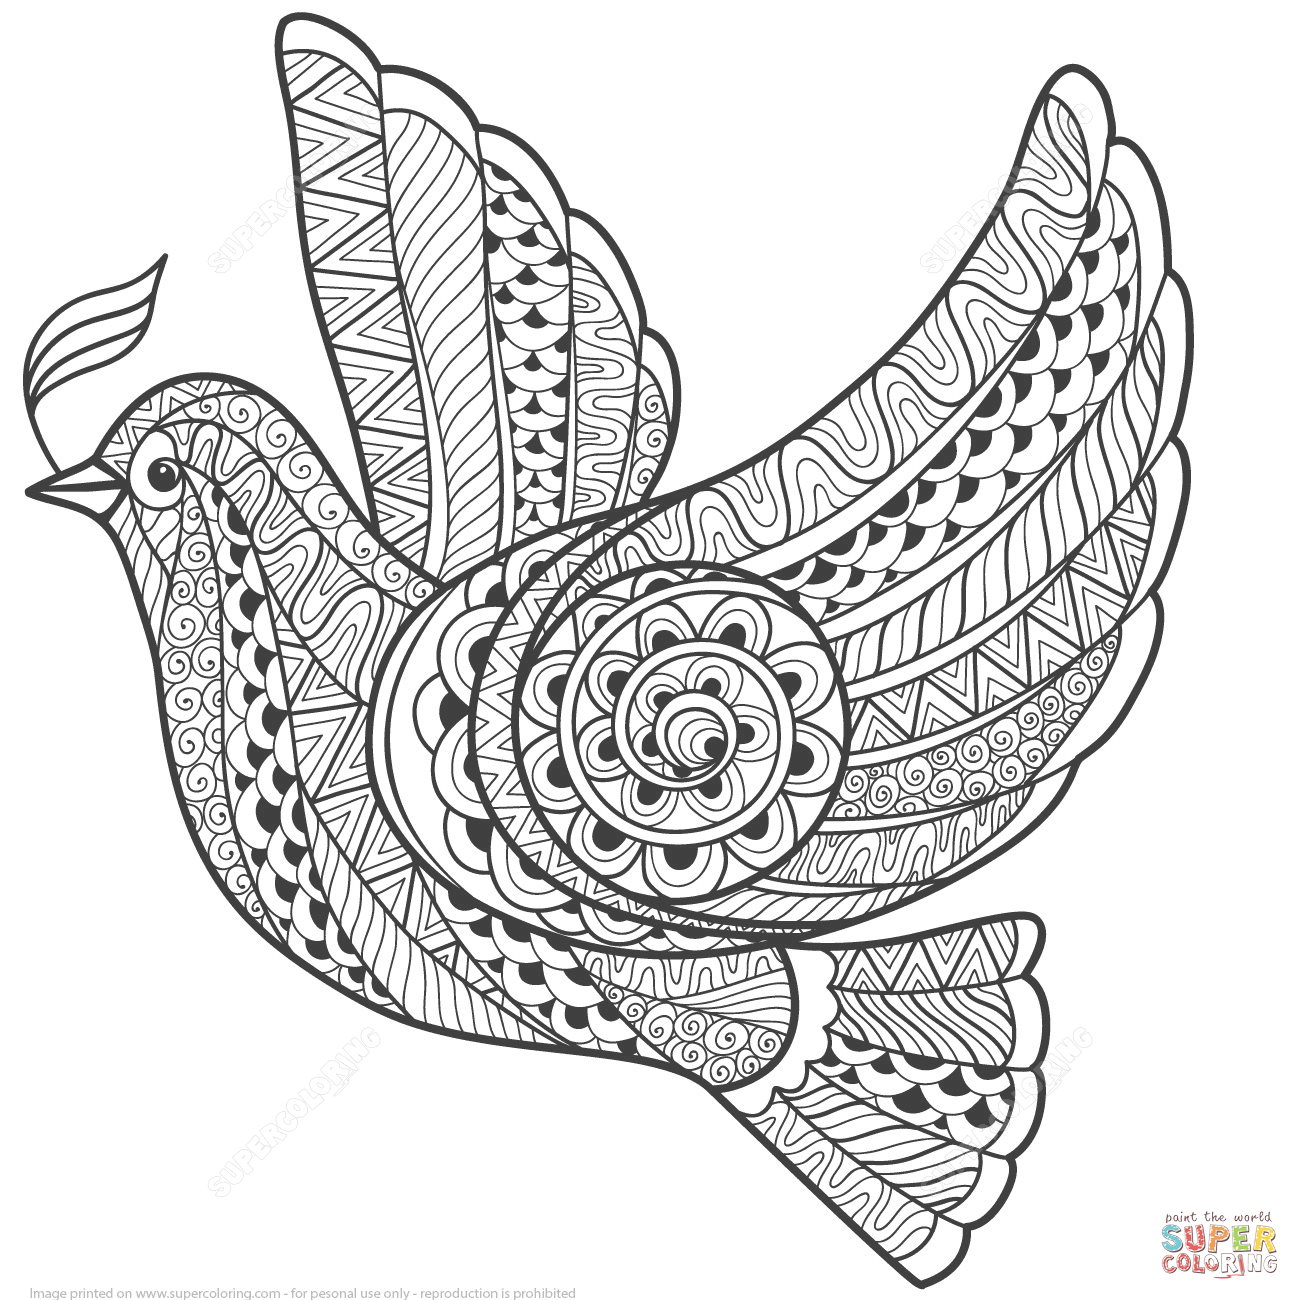 Zentangle Dove of Peace coloring page | Free Printable Coloring Pages